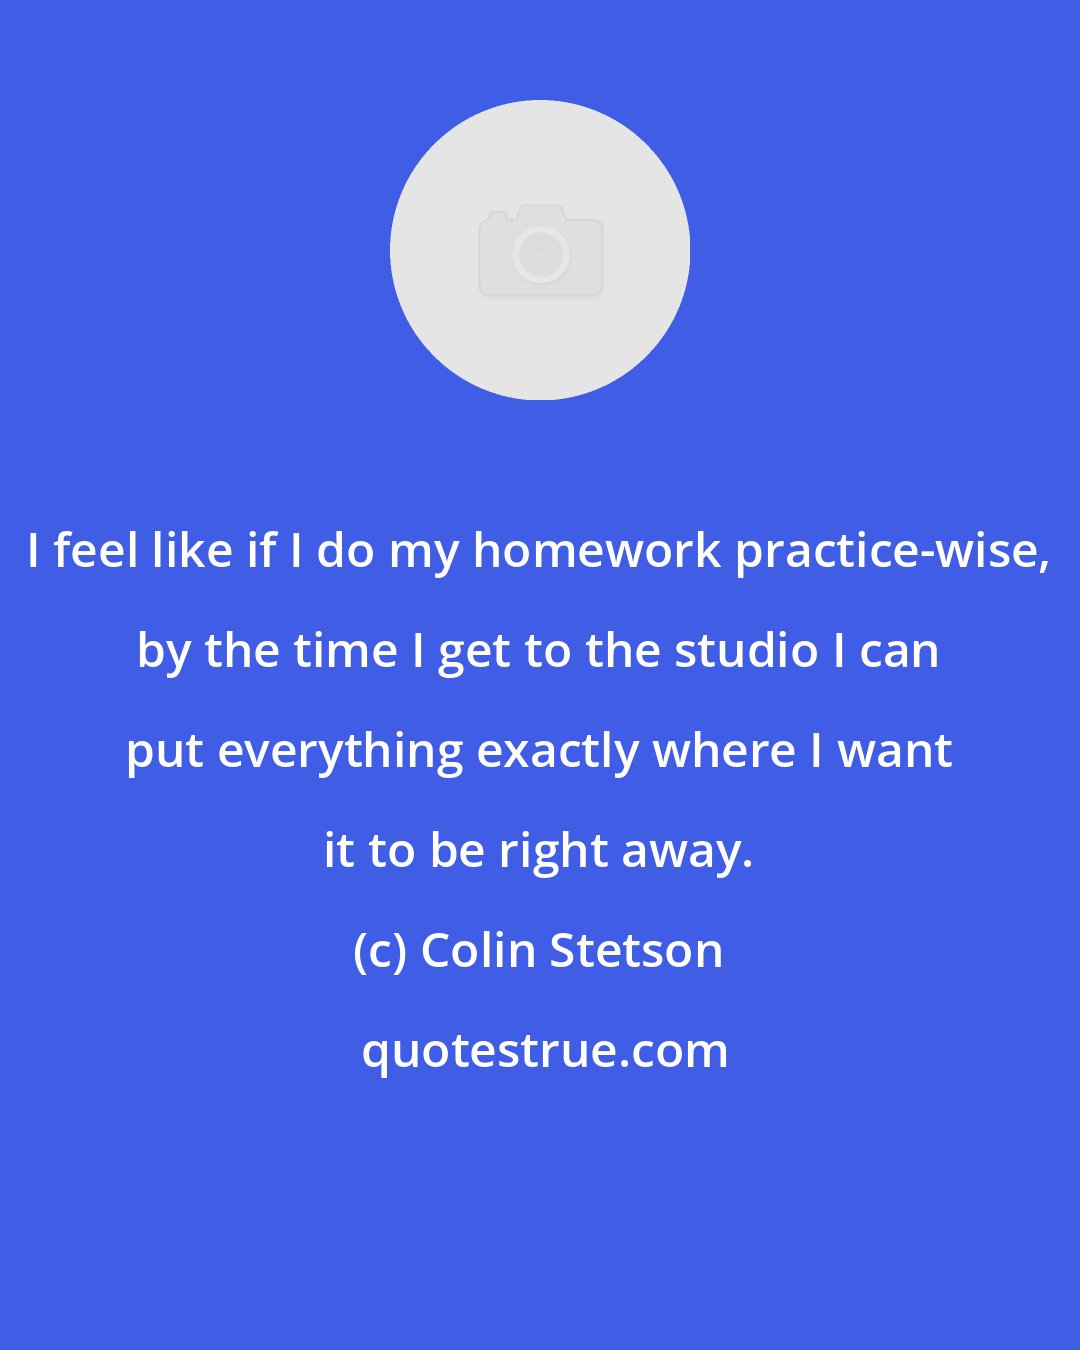 Colin Stetson: I feel like if I do my homework practice-wise, by the time I get to the studio I can put everything exactly where I want it to be right away.